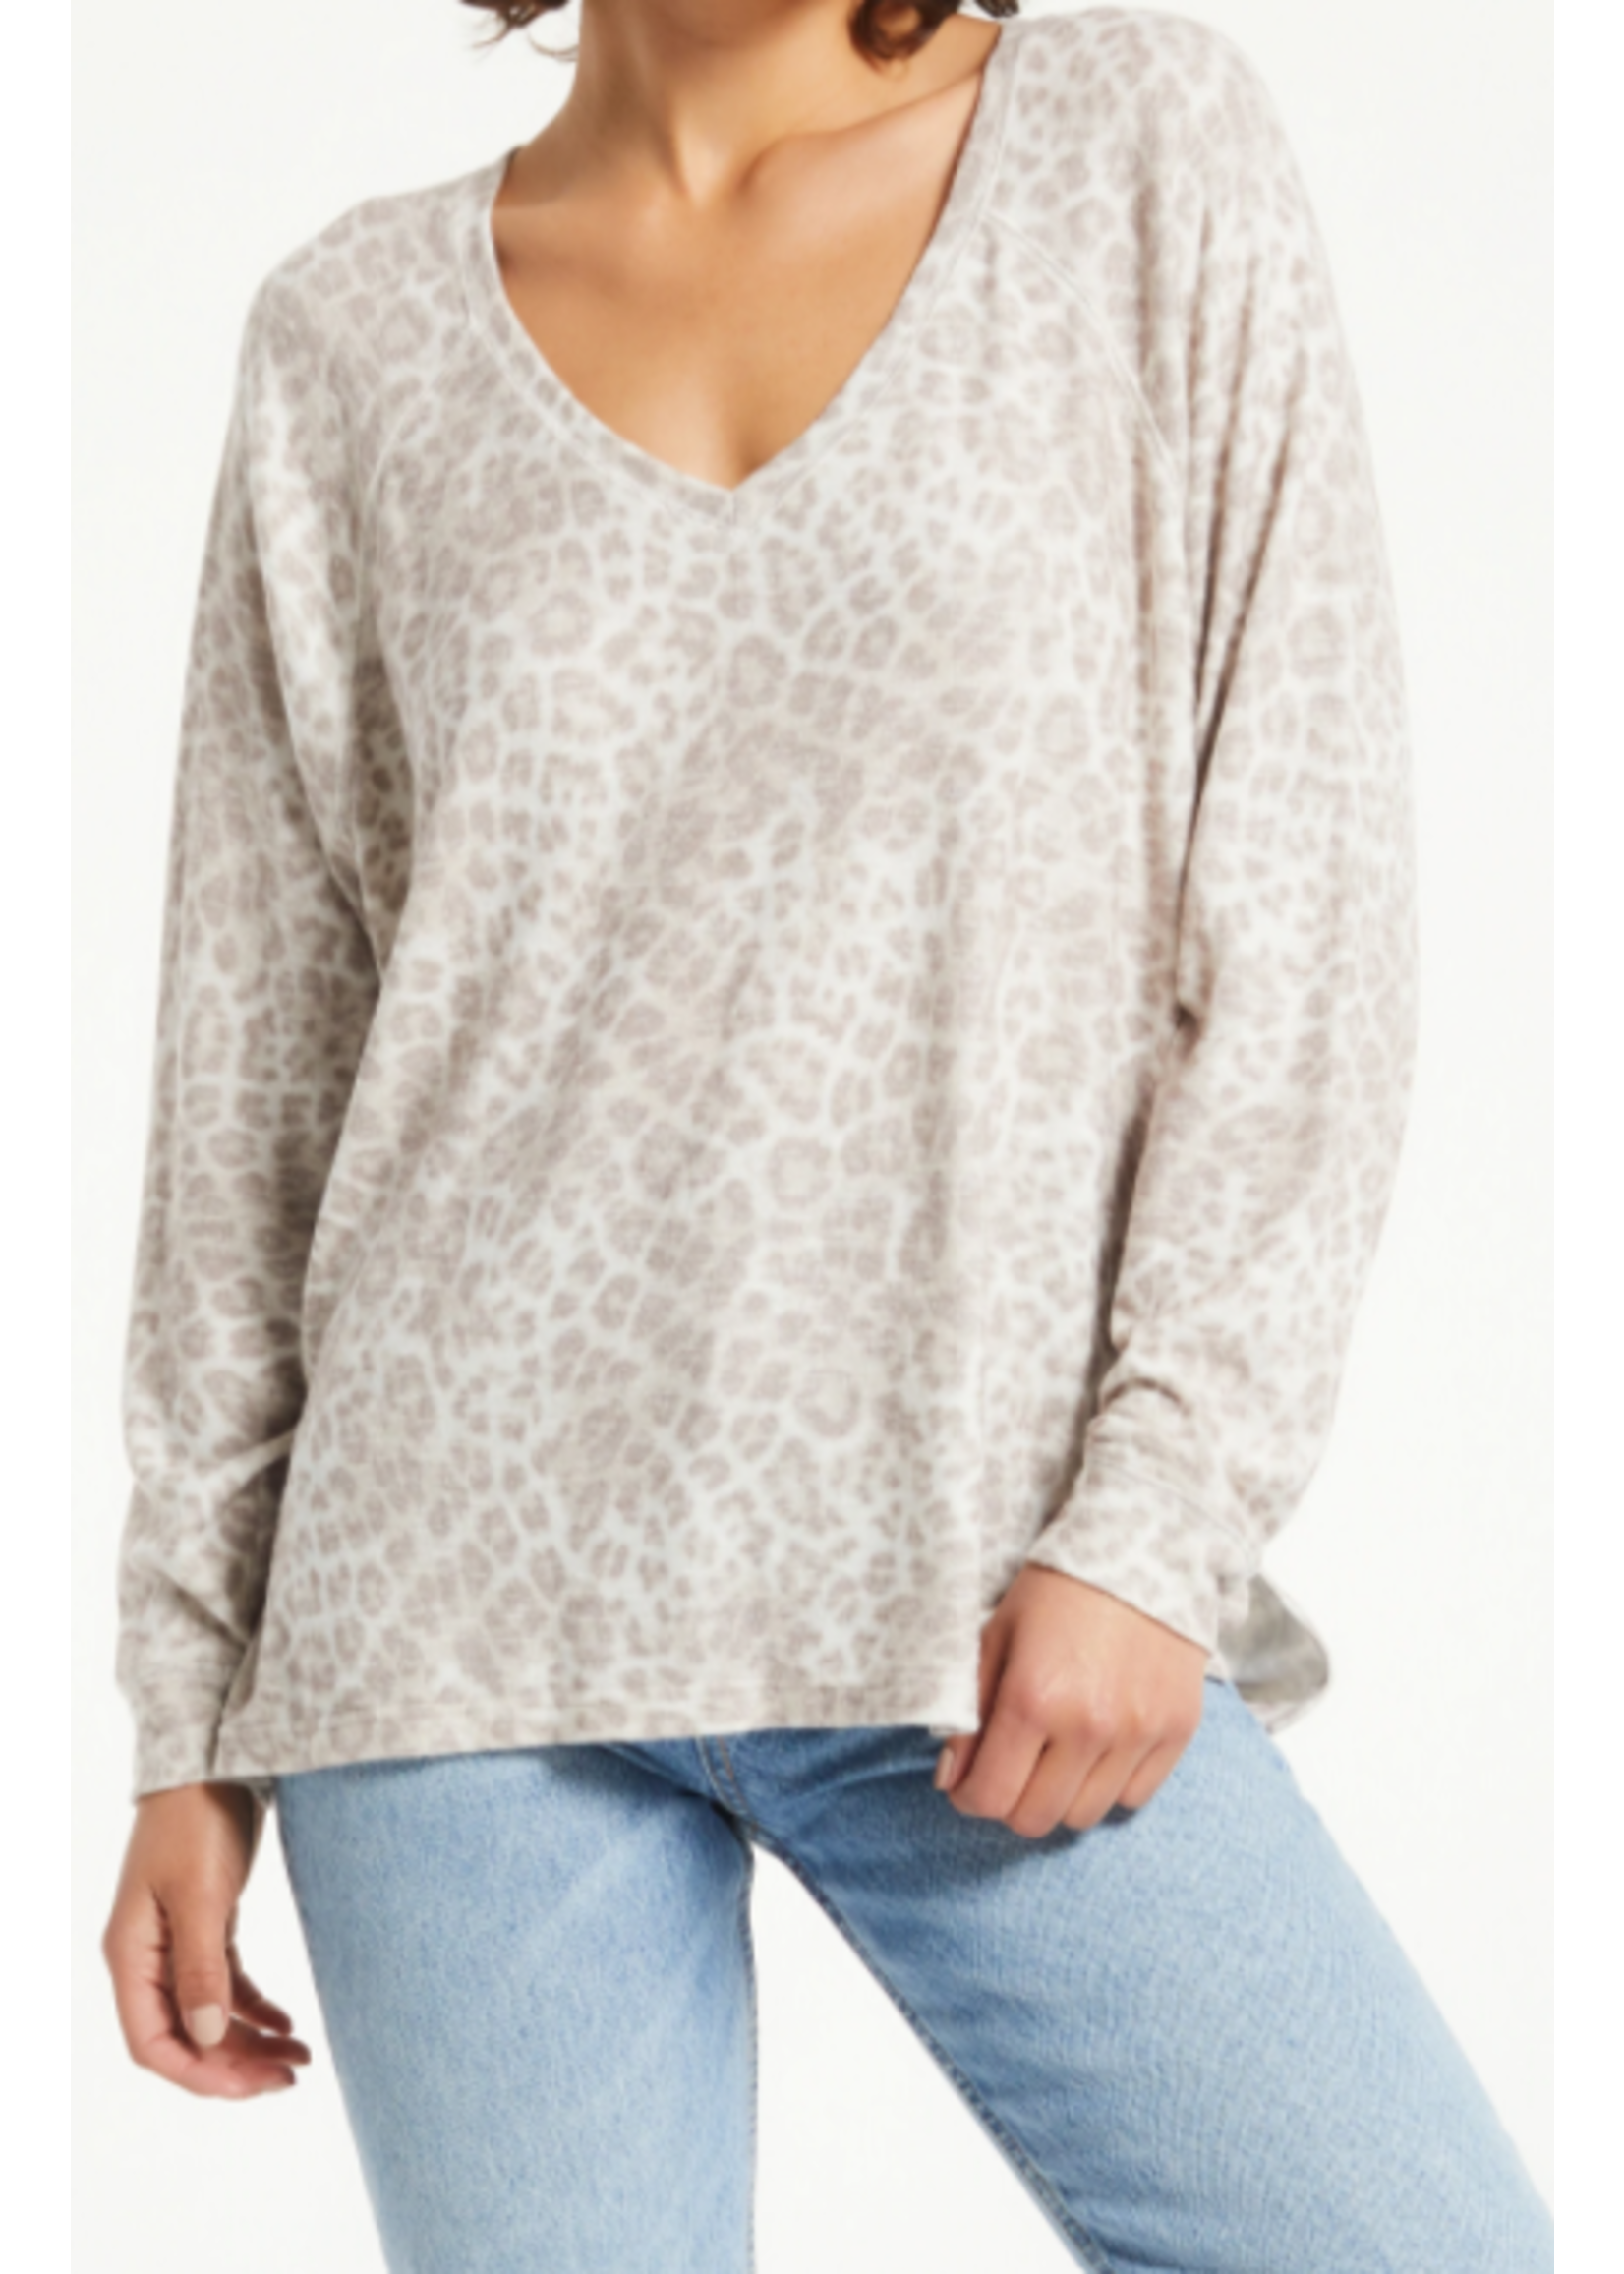 Z SUPPLY T SHIRTS LYNDELL LEOPARD SWEATER TOP